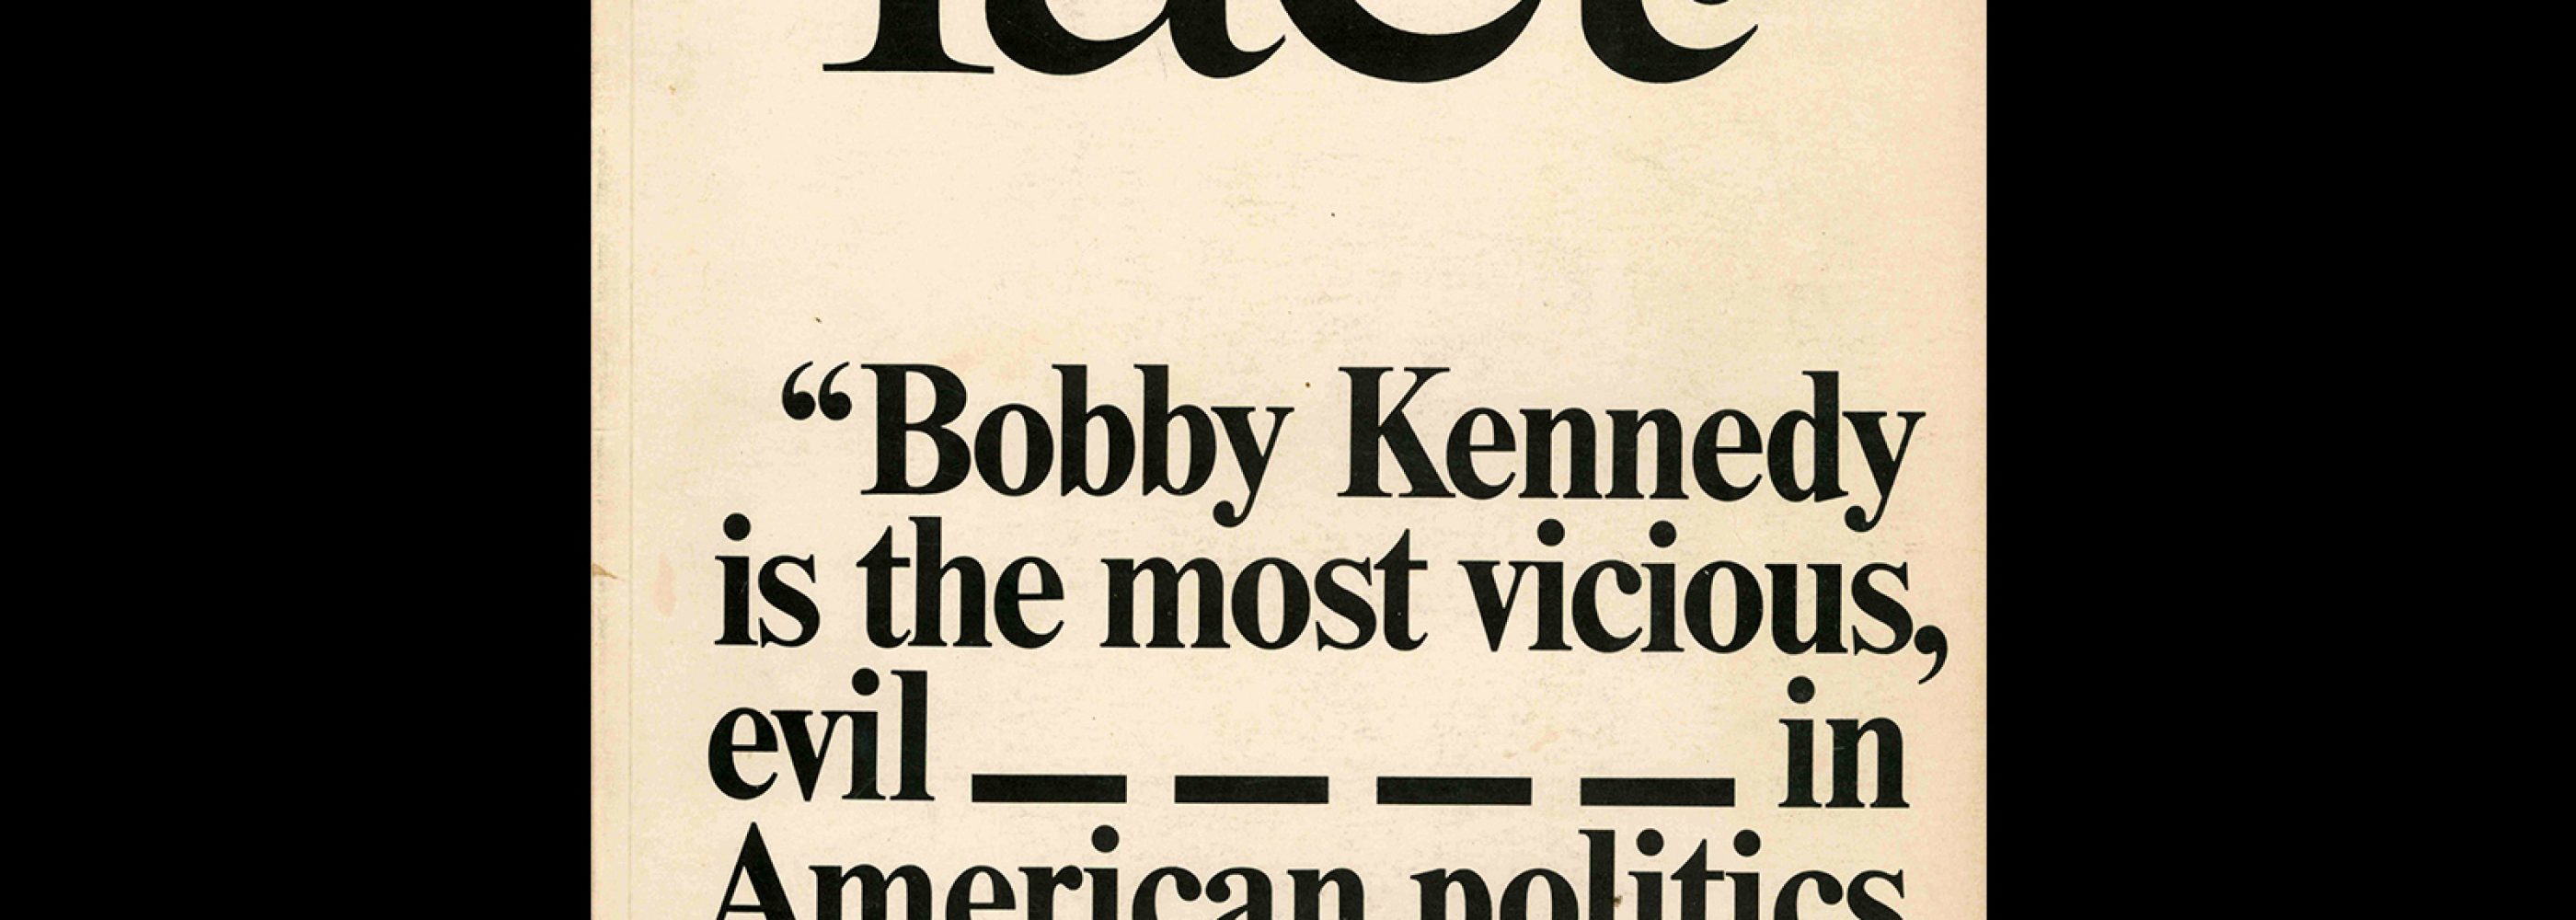 Fact, Volume One, Issue Four, 1964. Designed by Herb Lubalin